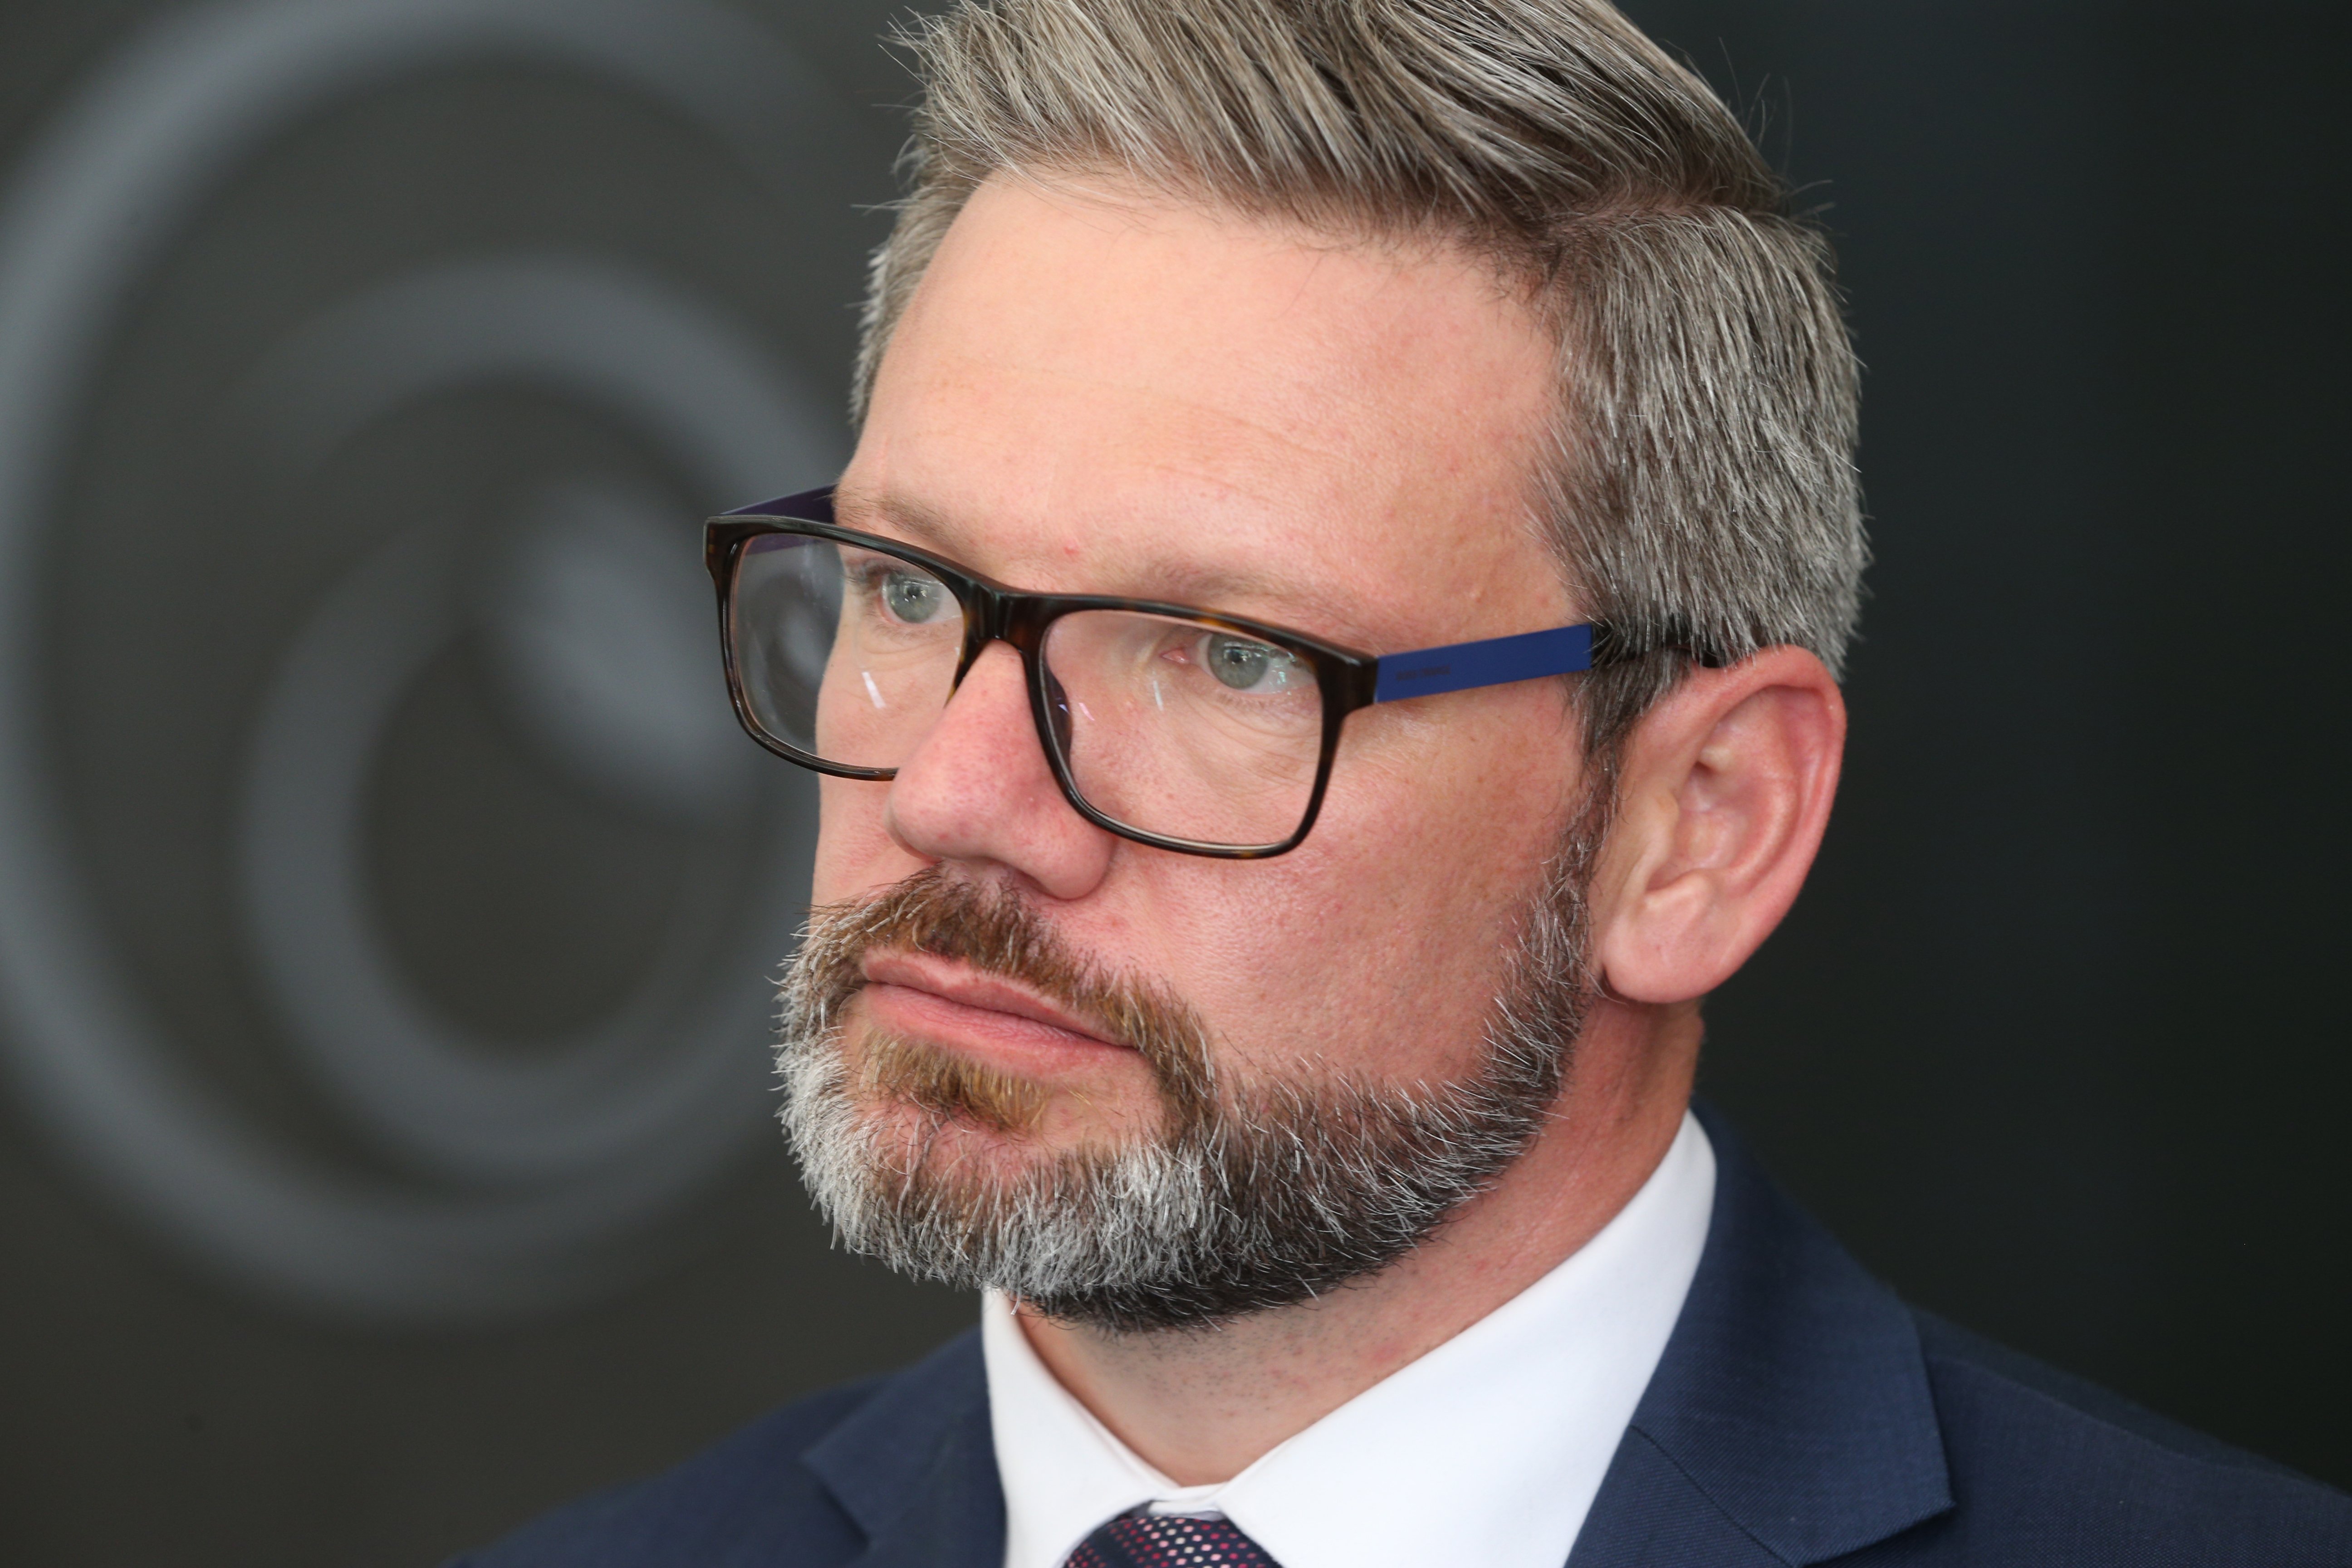 Immigration Minister, Iain Lees-Galloway, said the treatment of the alleged victim was "appalling...